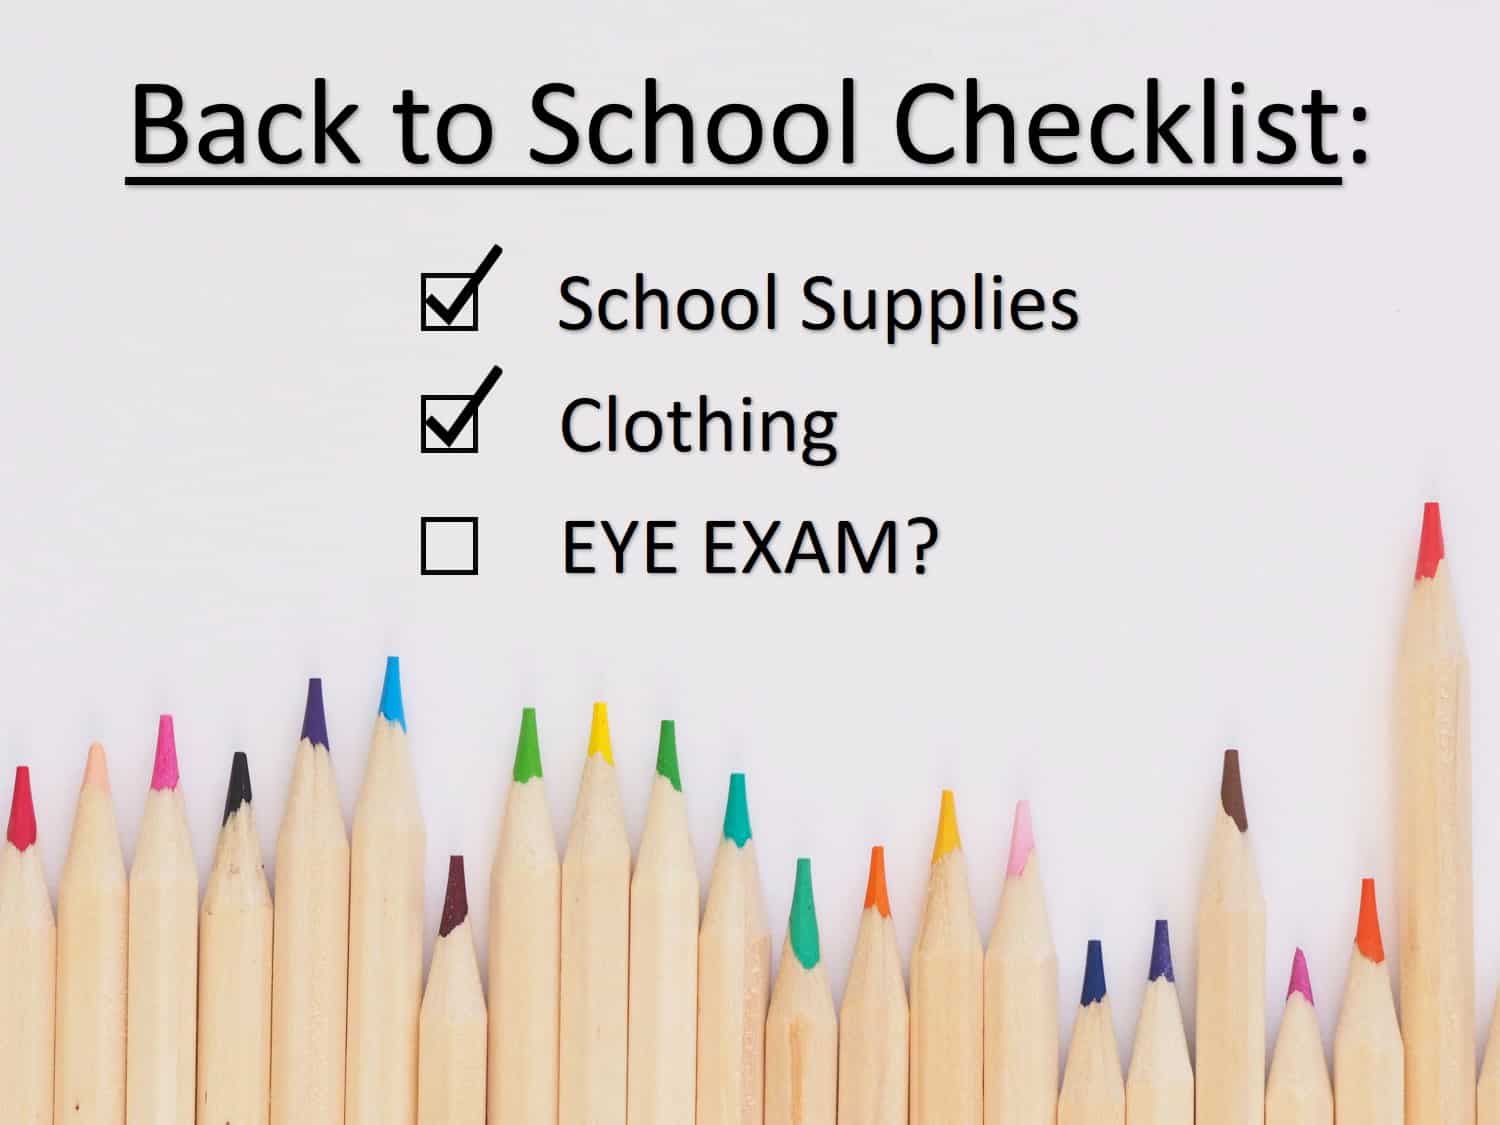 Colored pencils with a back to school checklist